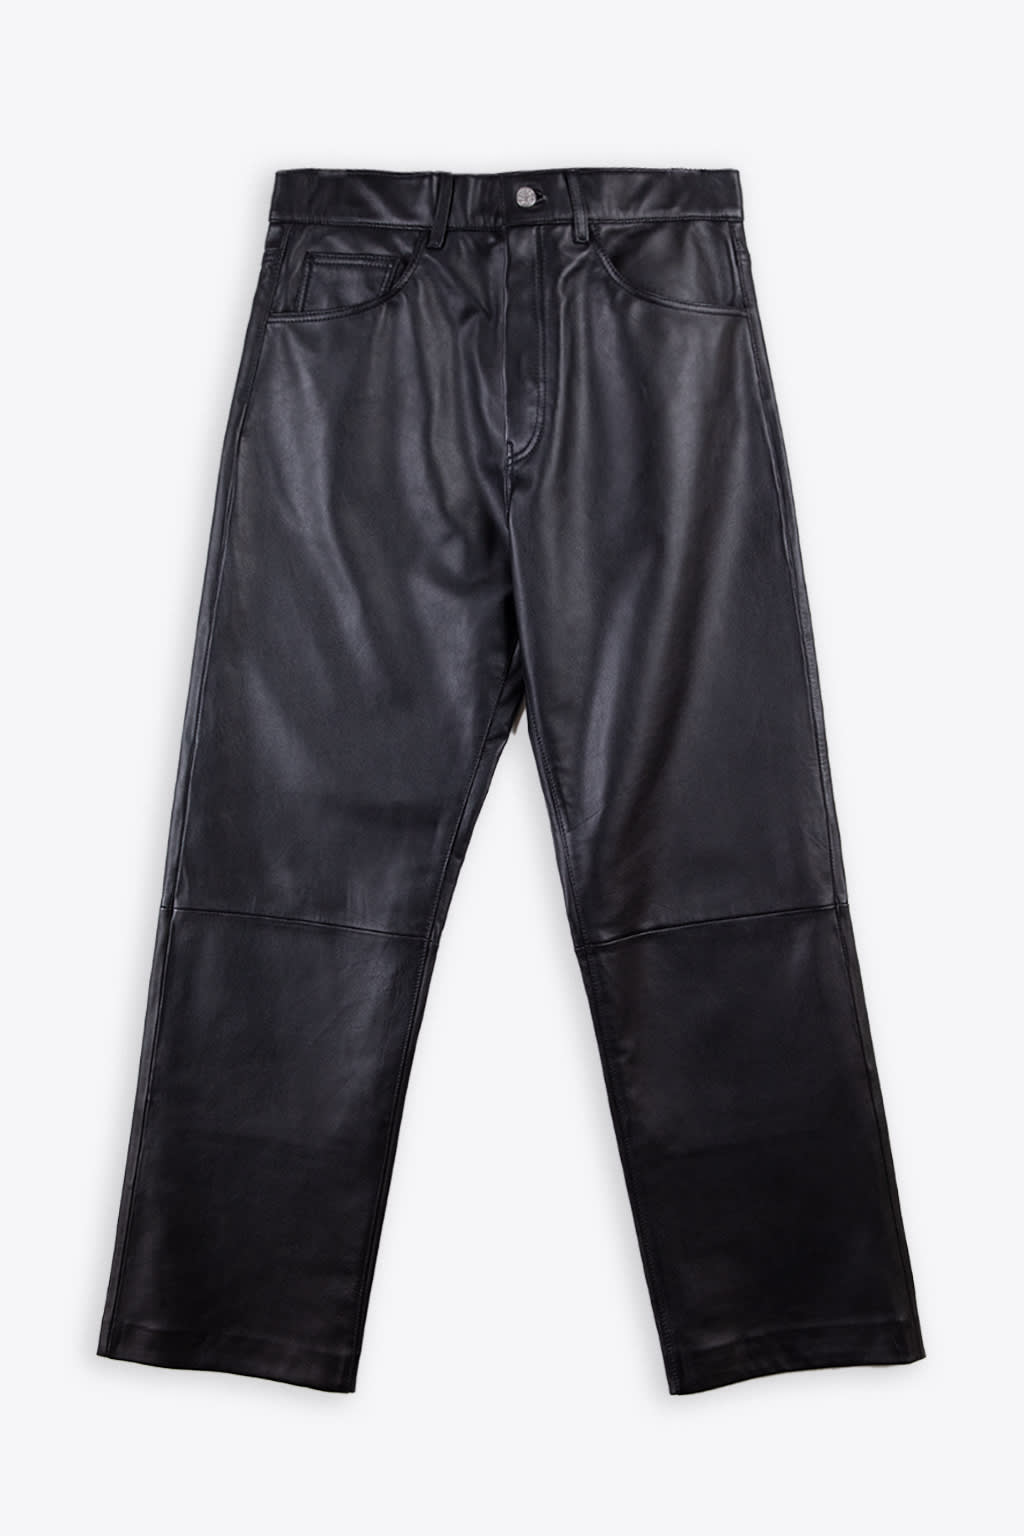 Shop Sunflower Loose Leather Black Leather Loose Pant - Loose Leather Pant